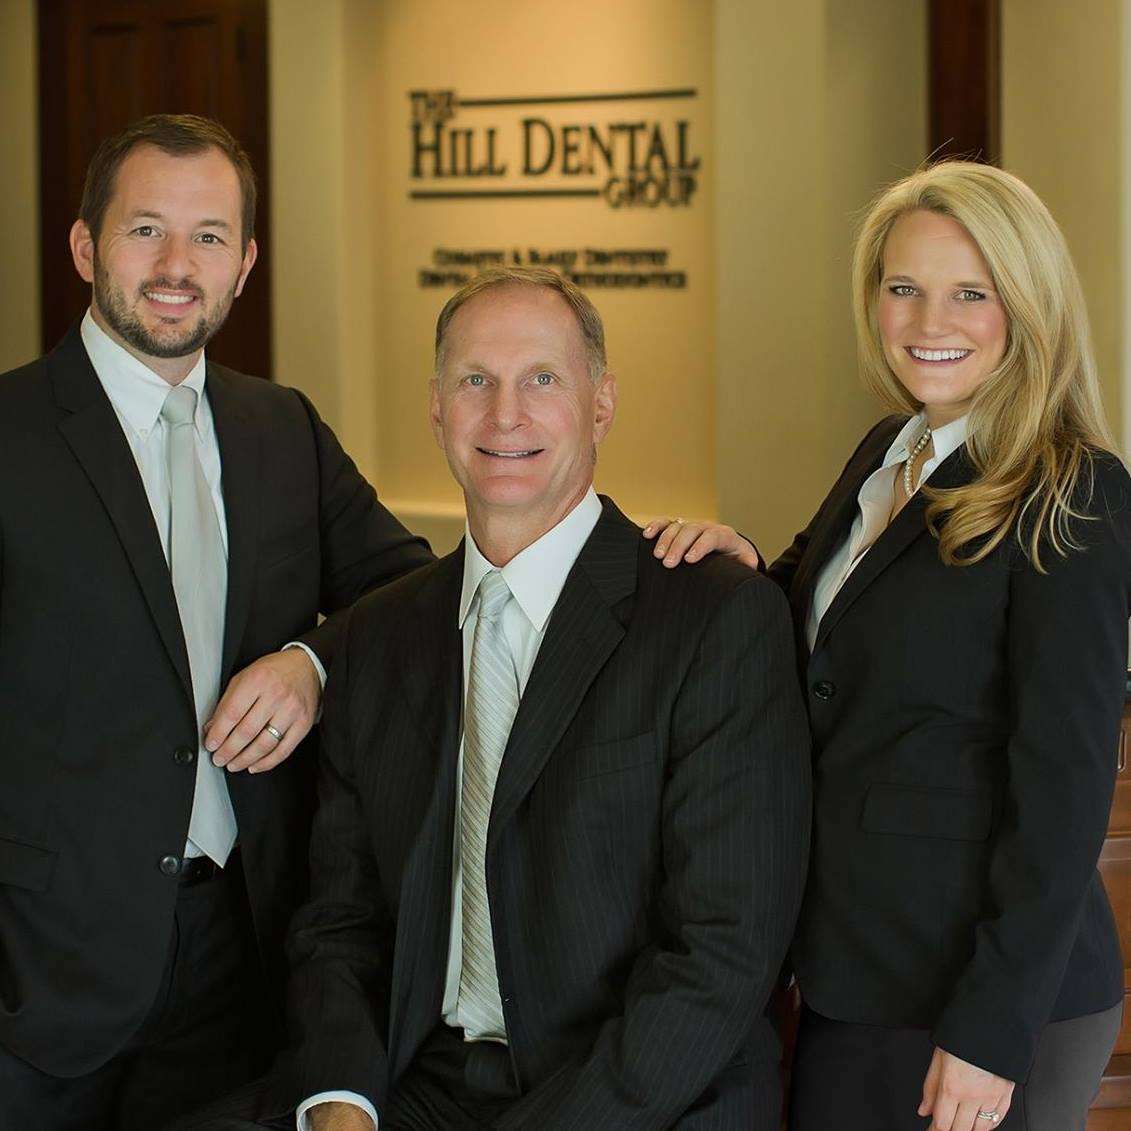 The Hill Dental Group Profile Picture